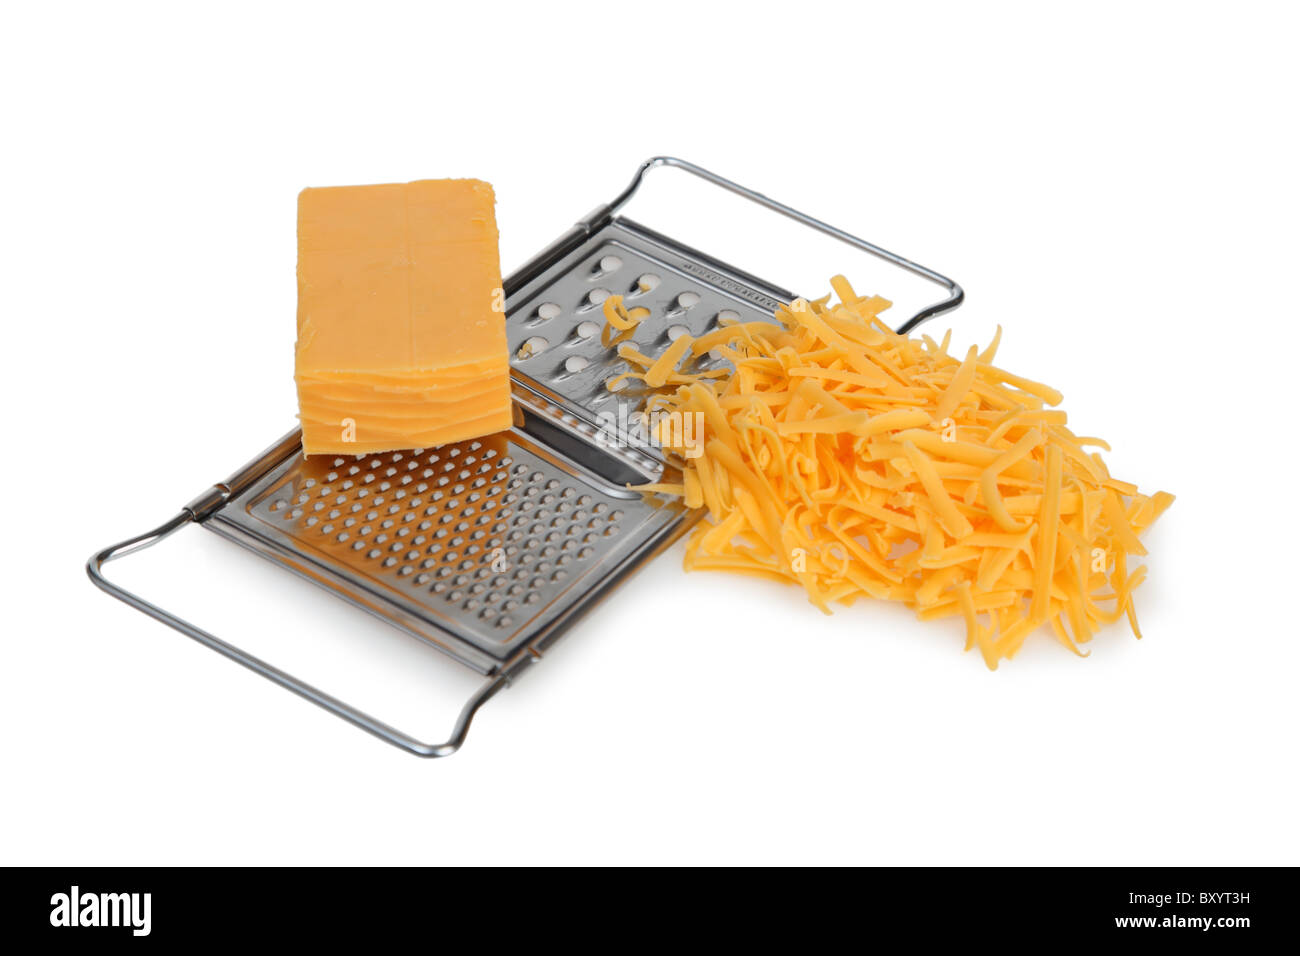 Cheese grater and cheese on white background Stock Photo